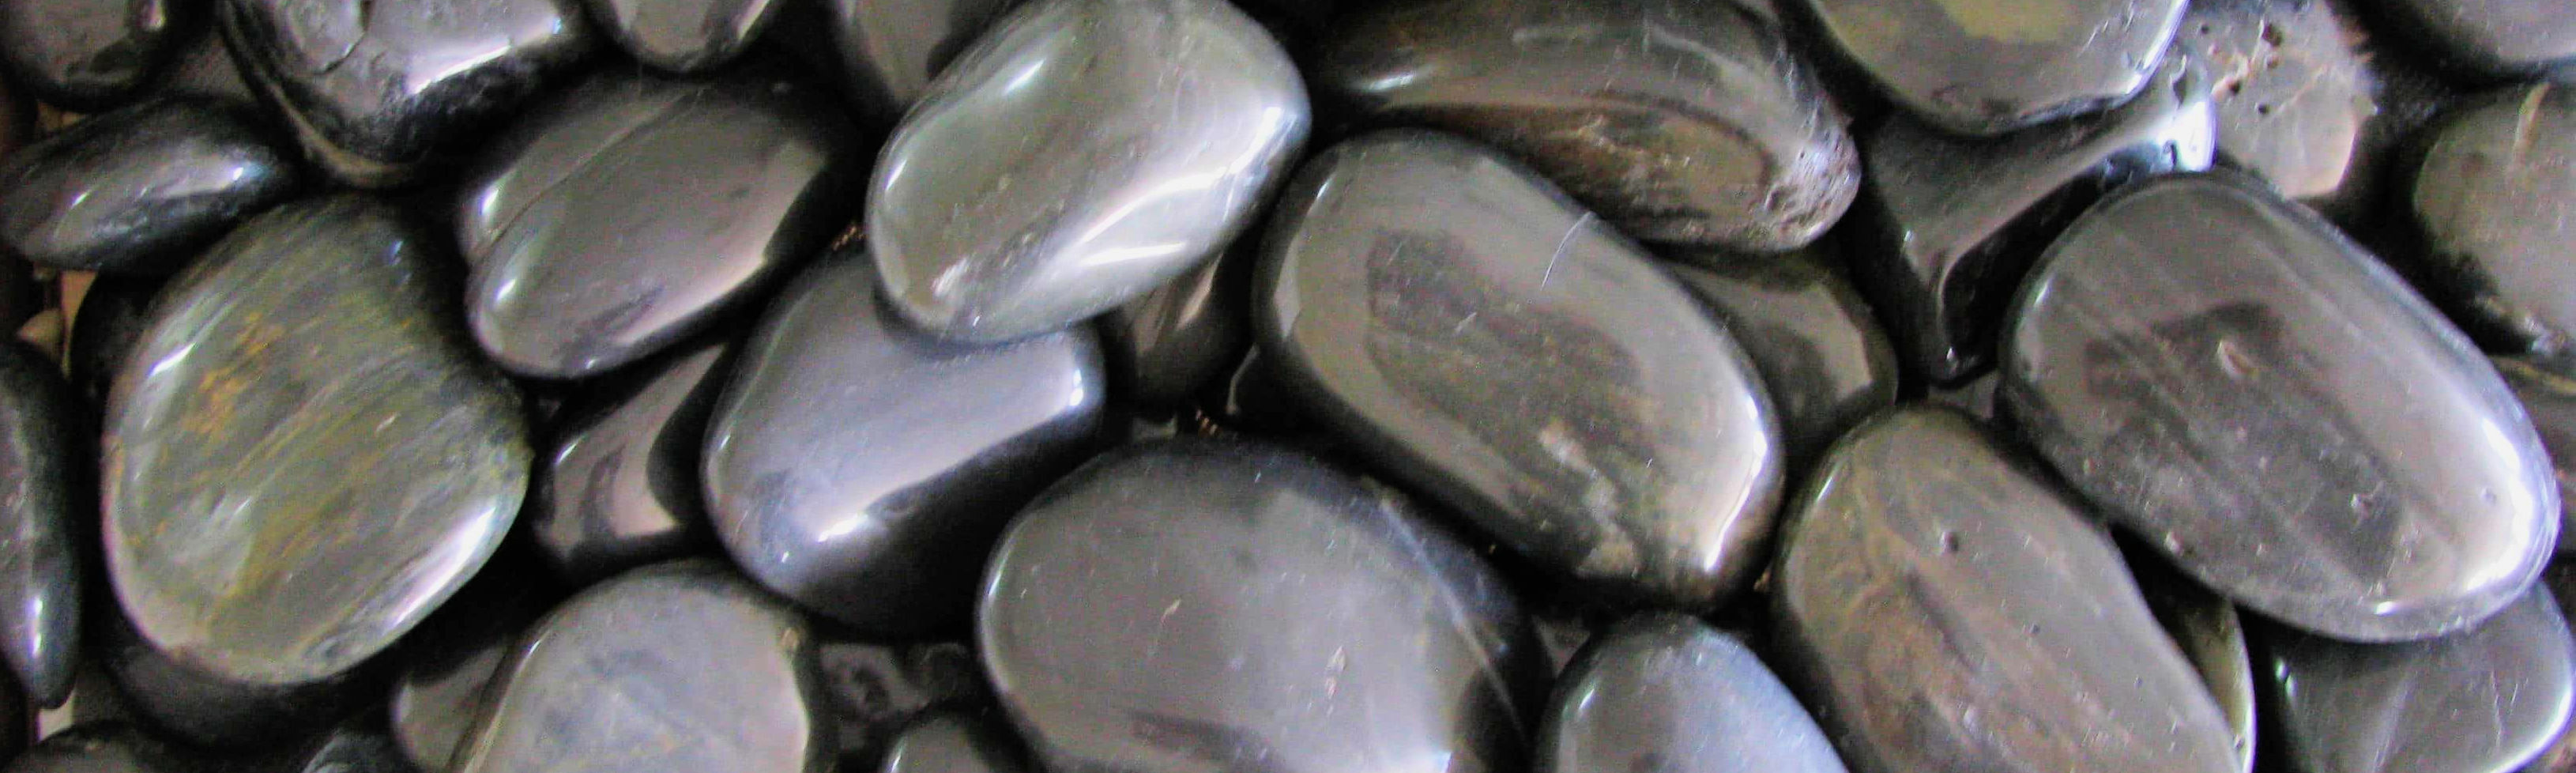 Showing a closeup of Polished Black Pebbles